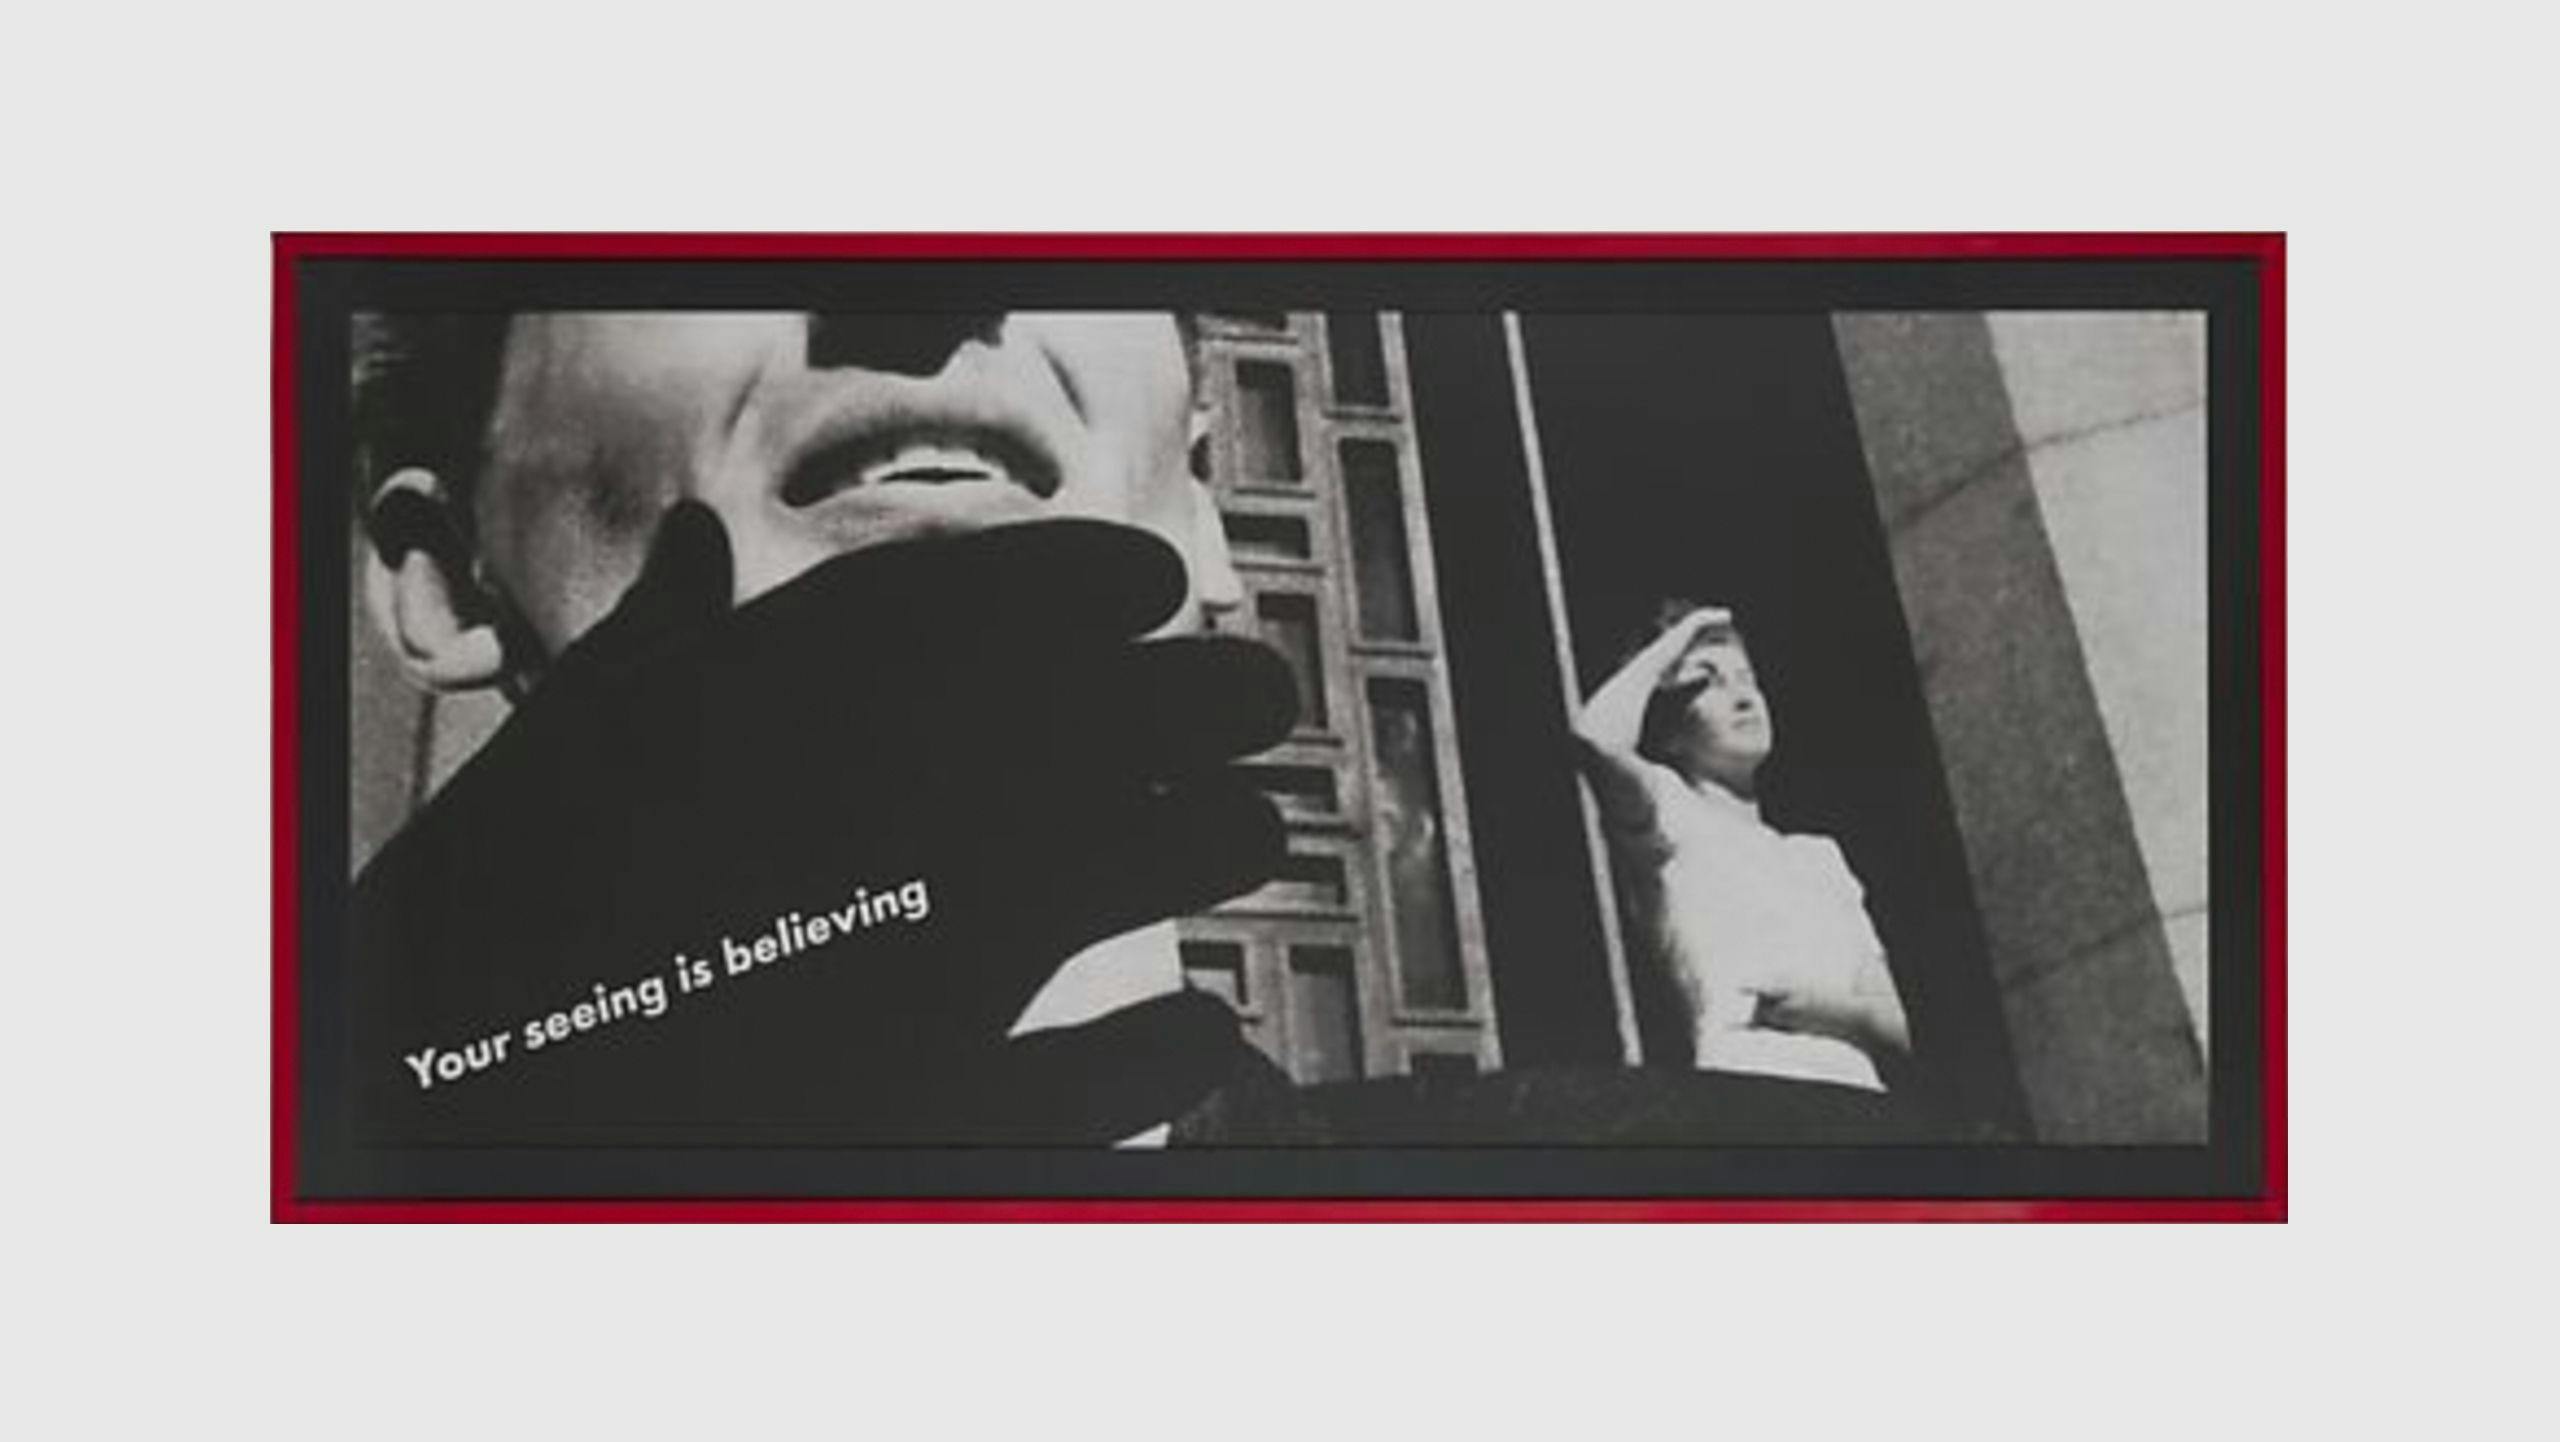 An artwork by Barbara Kruger called Untitled (Your Seeing Is Believing), dated 1984